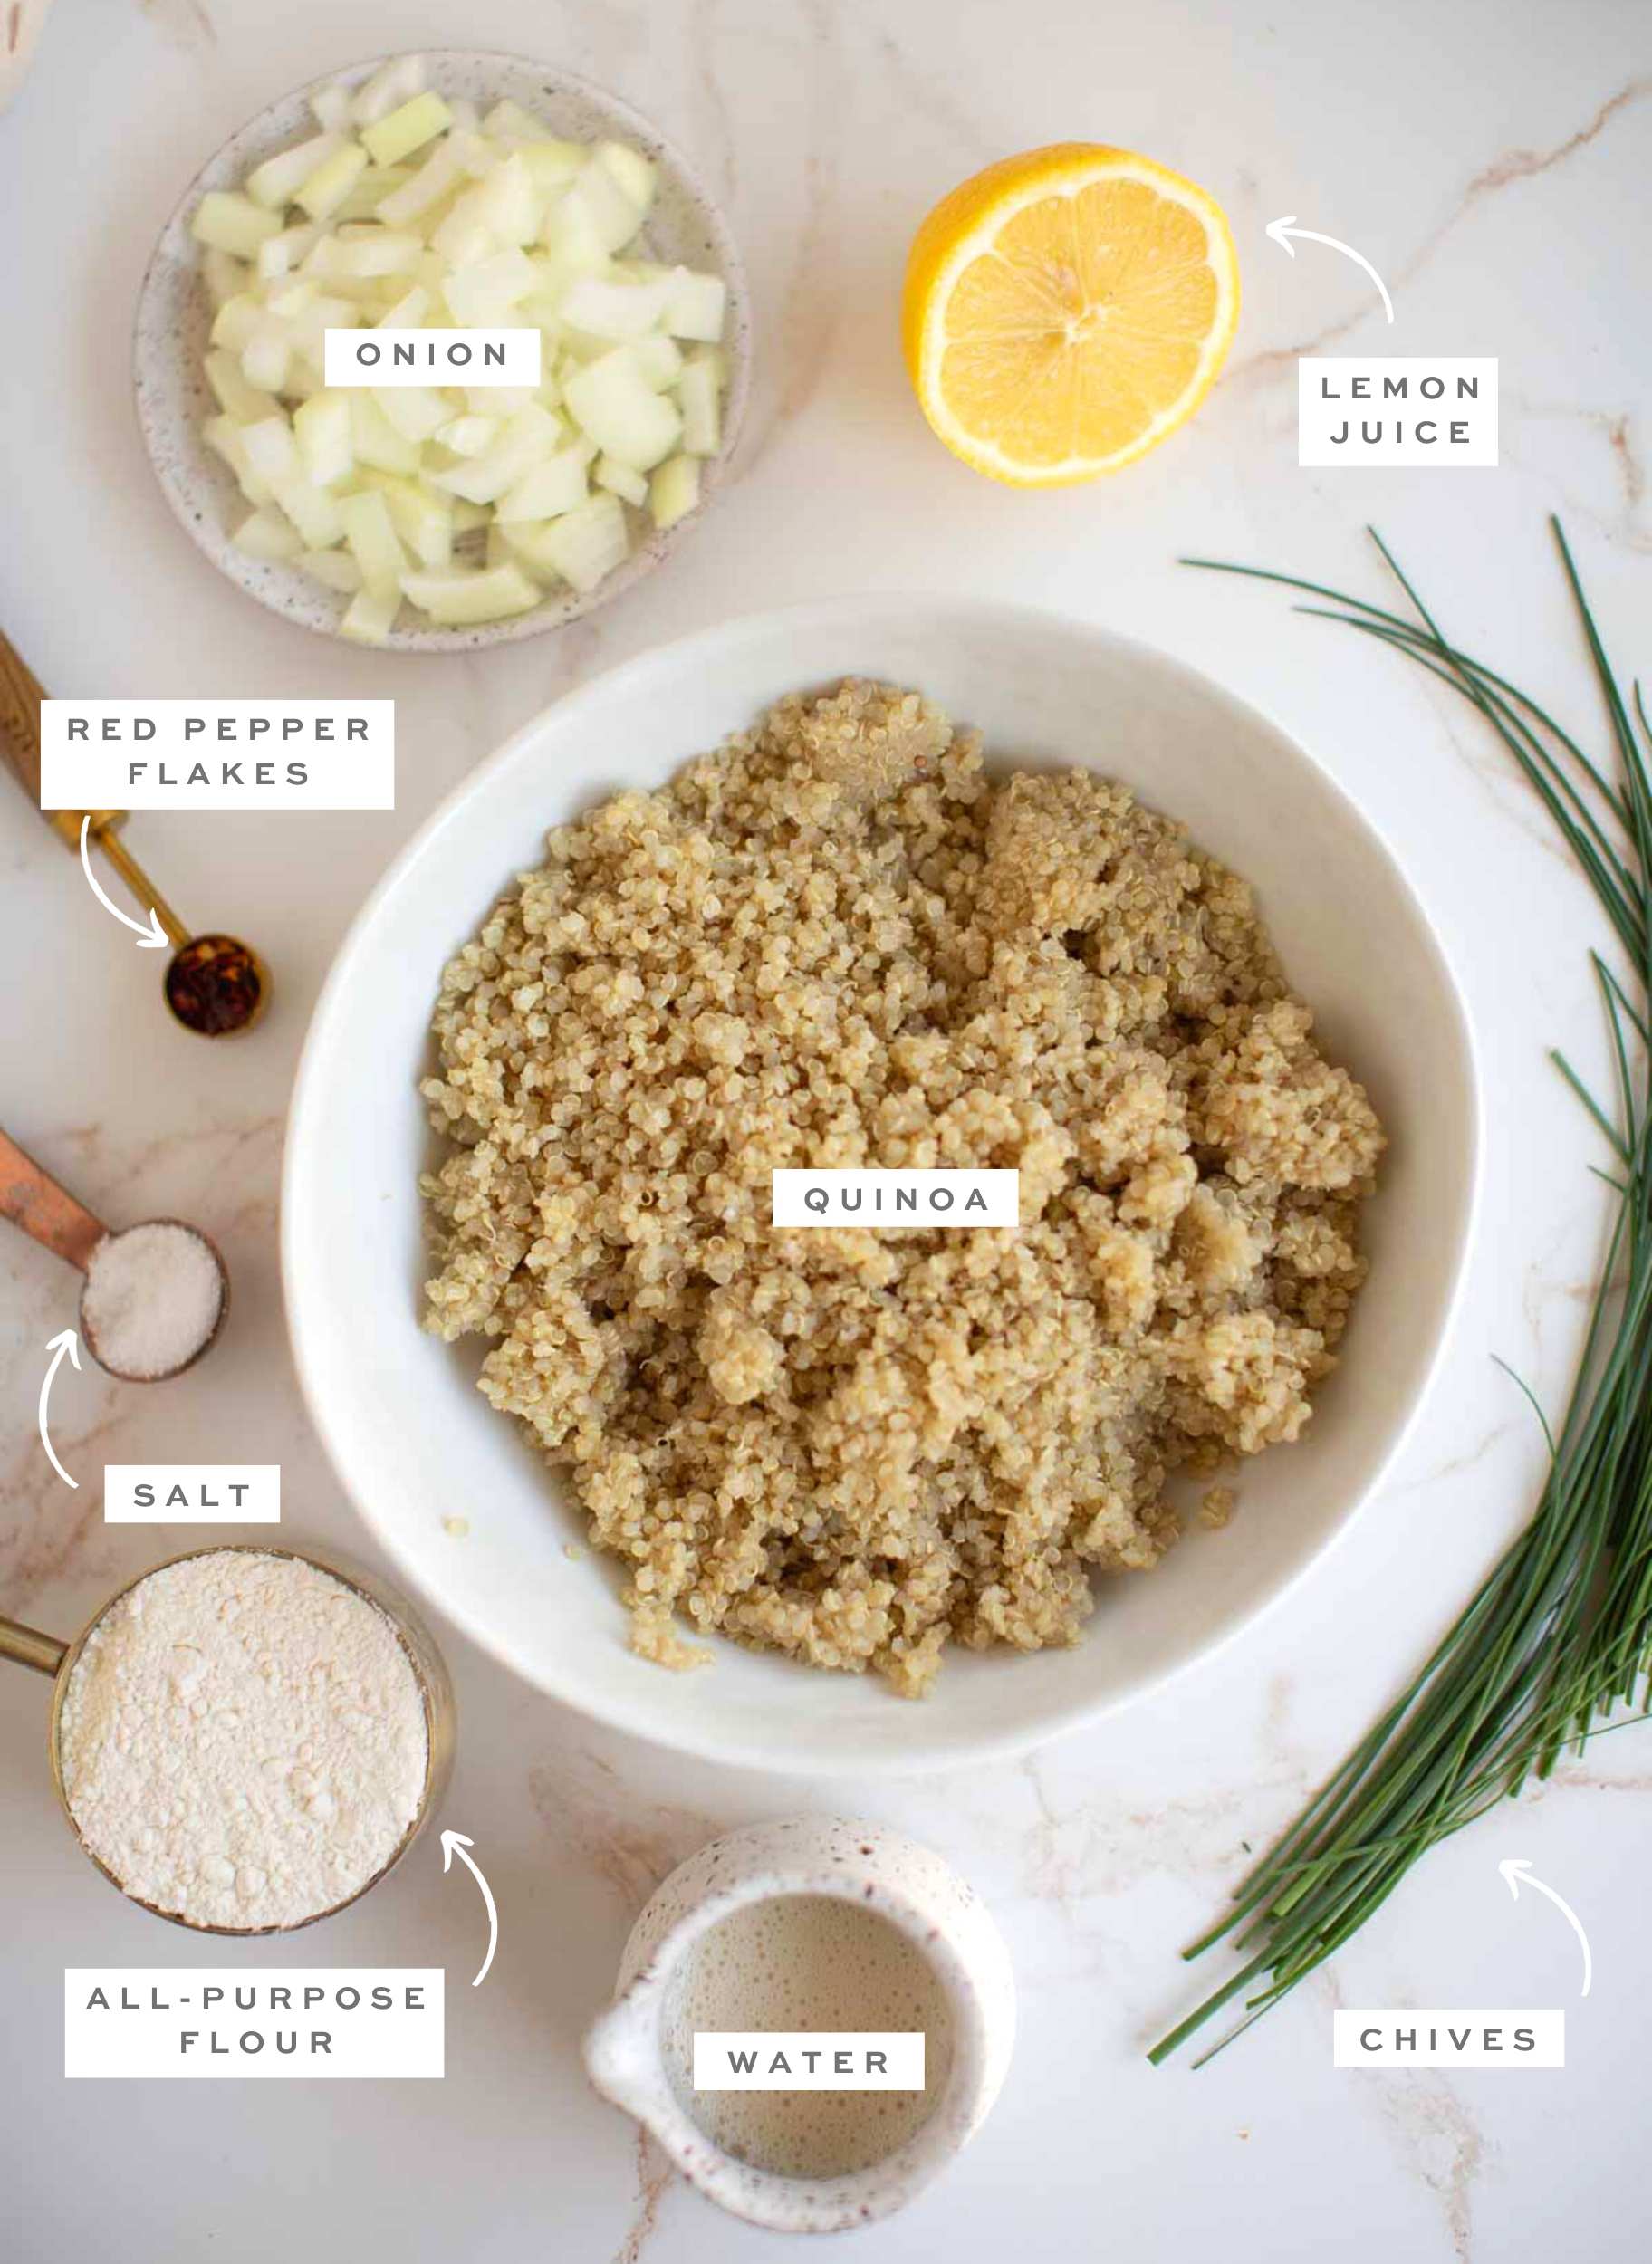 Gathered ingredients for quinoa nuggets with text labels.